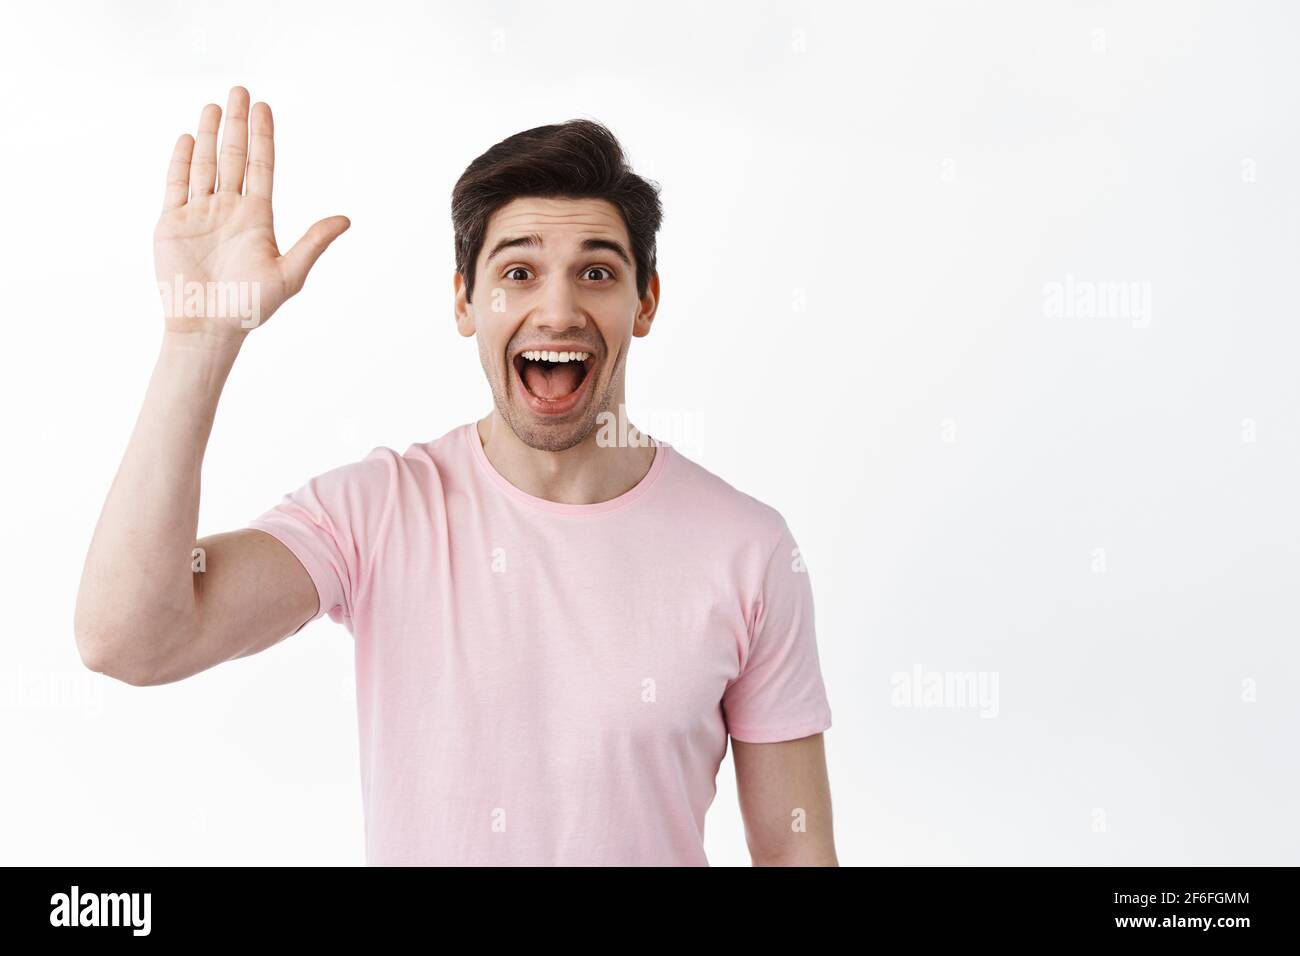 Excited friendly man waving hand and say hey, hello greeting gesture, extremely happy to see you, standing against white background in casual clothes Stock Photo